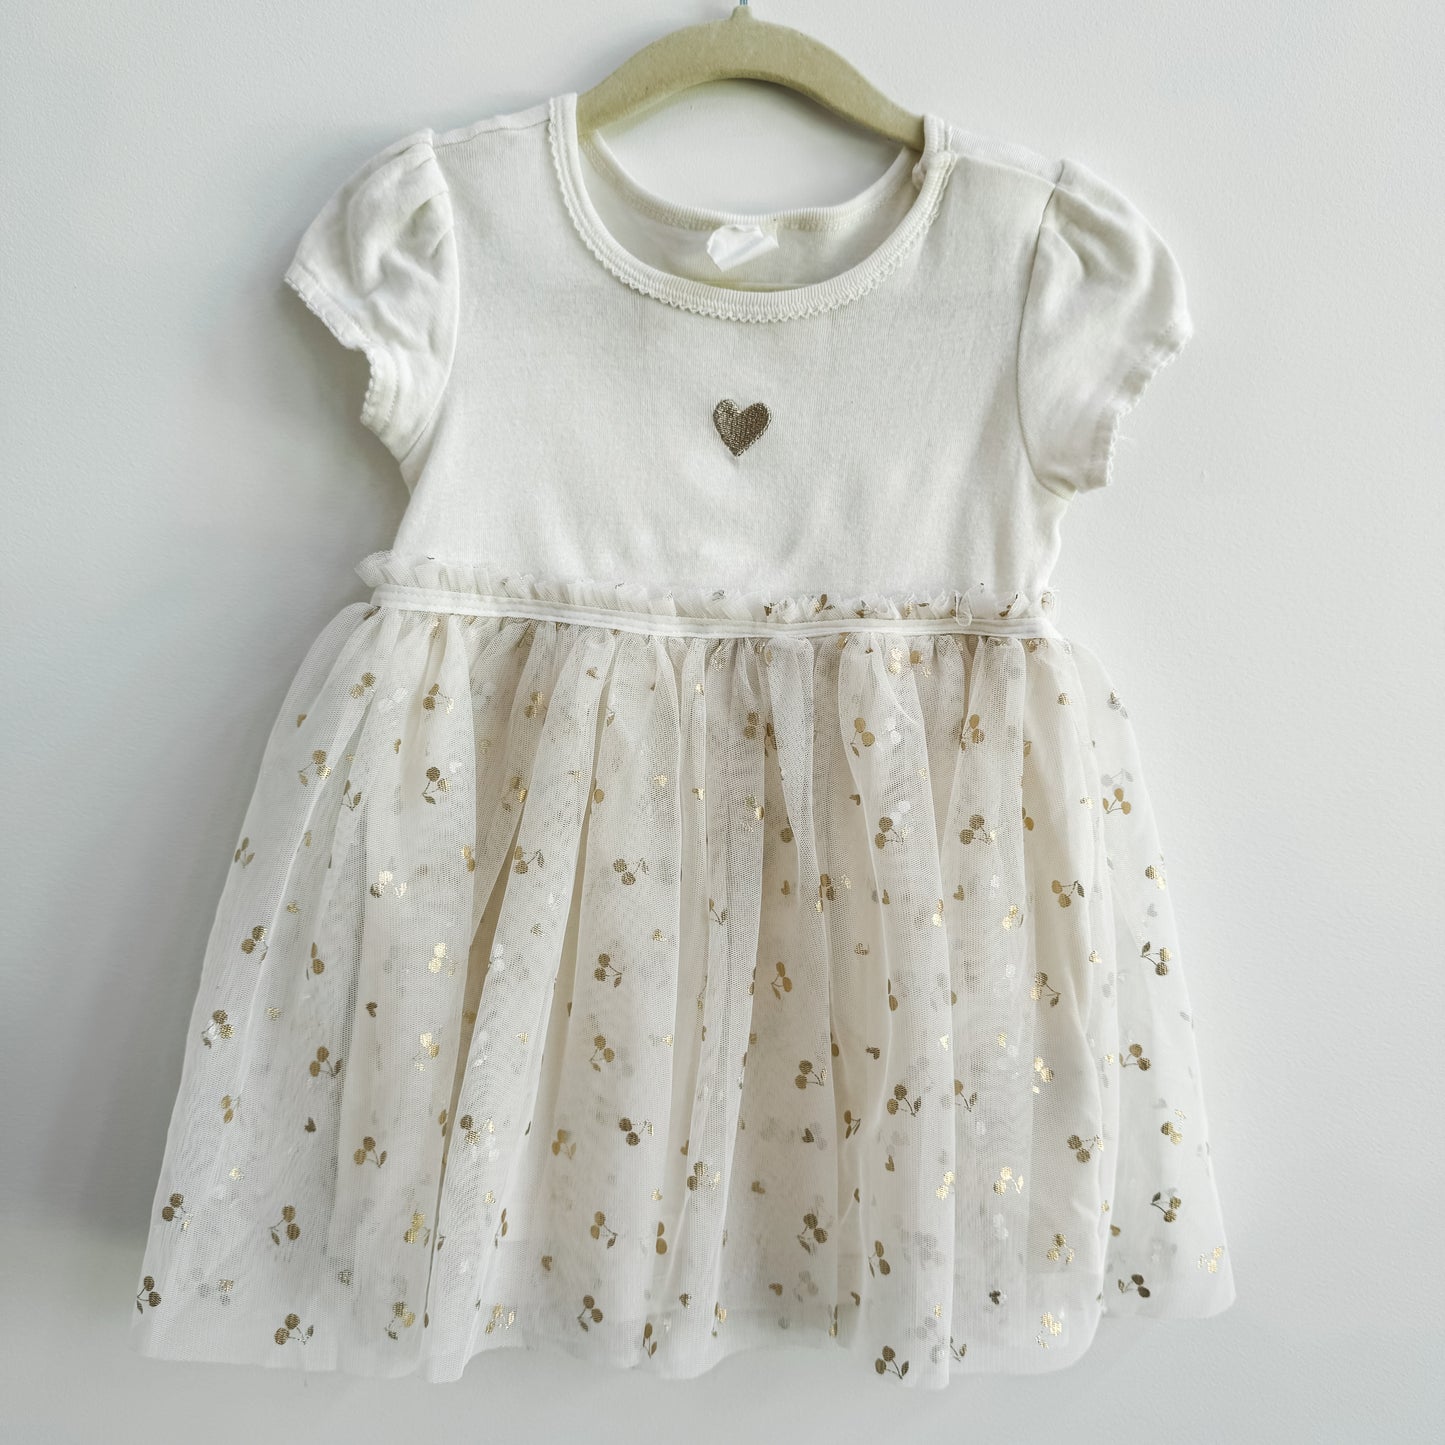 H&M Sparkly Tulle-Skirt Jersey Dress (12-18m)